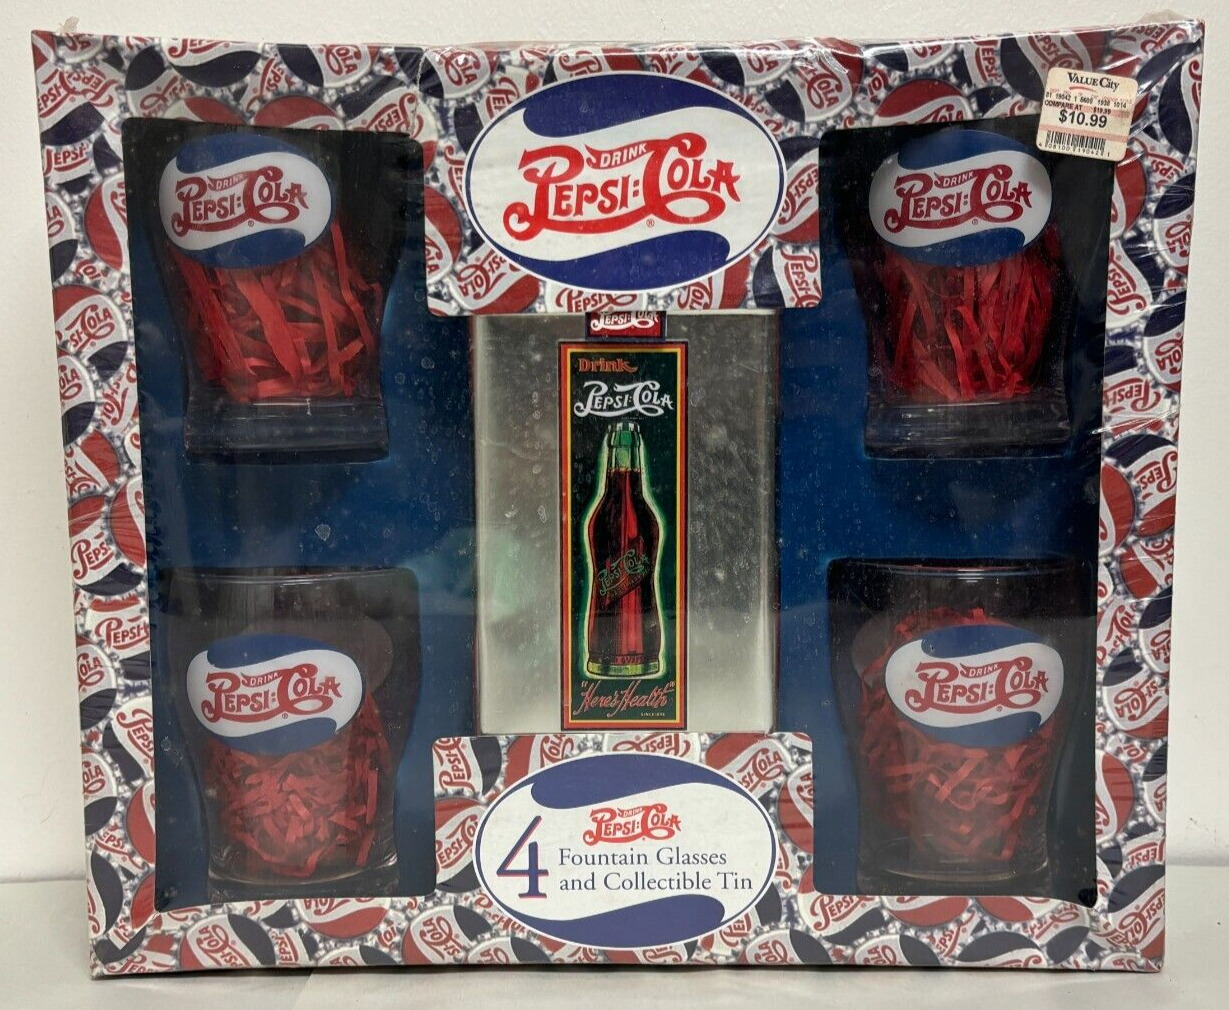 Pepsi-Cola 4 Fountain Glasses and Collectible Tin Gift Set - Sealed